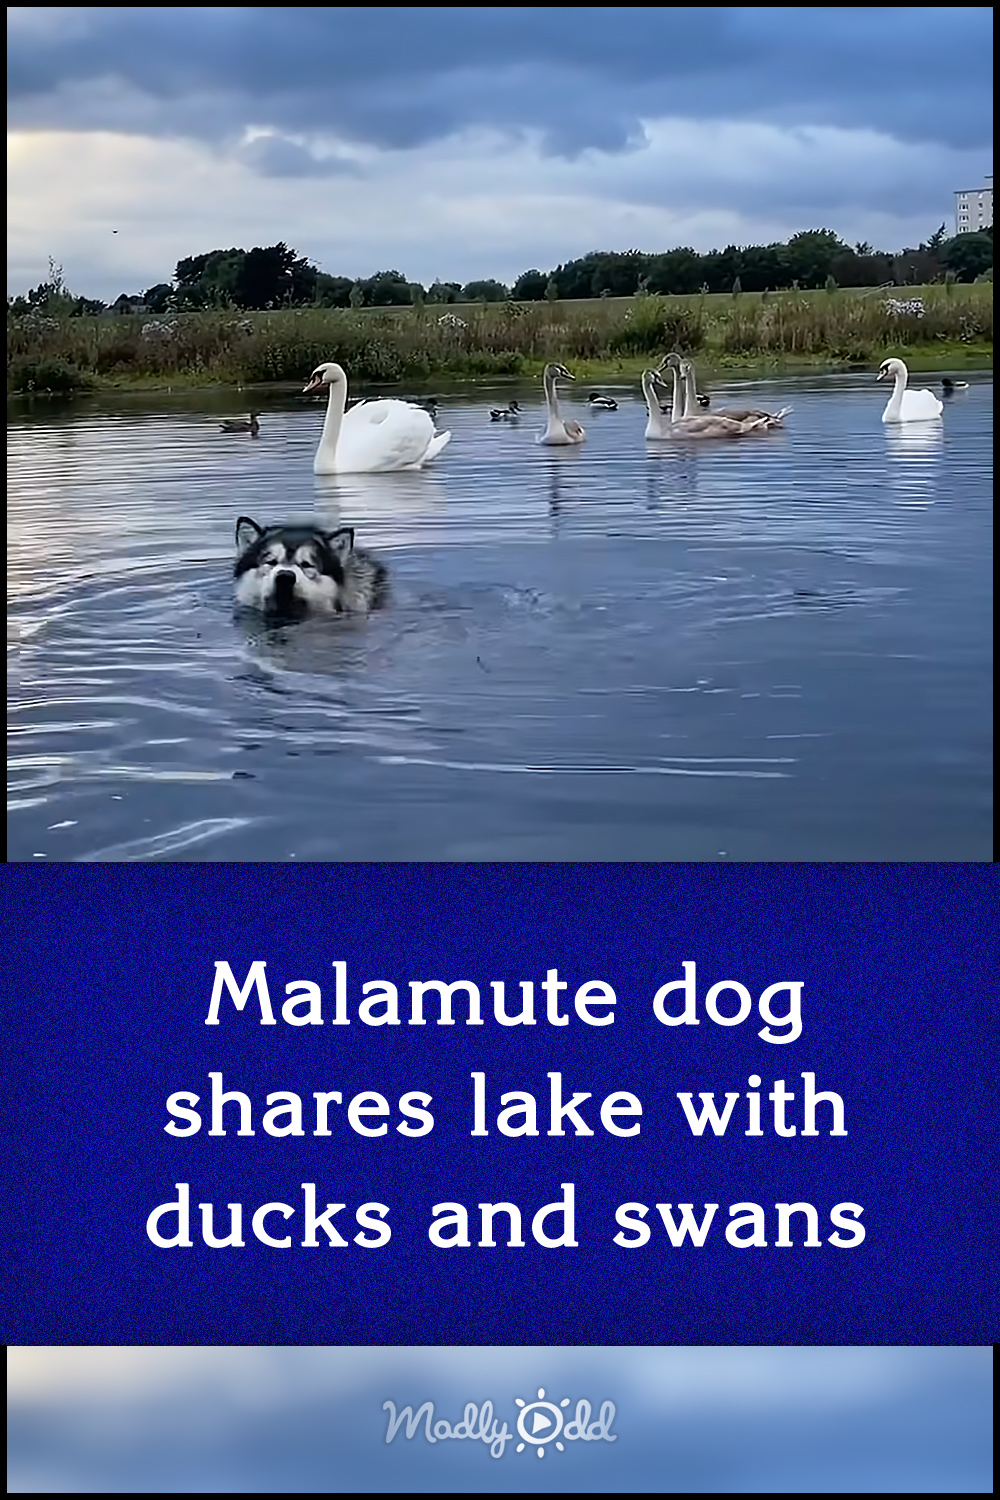 Malamute dog shares lake with ducks and swans